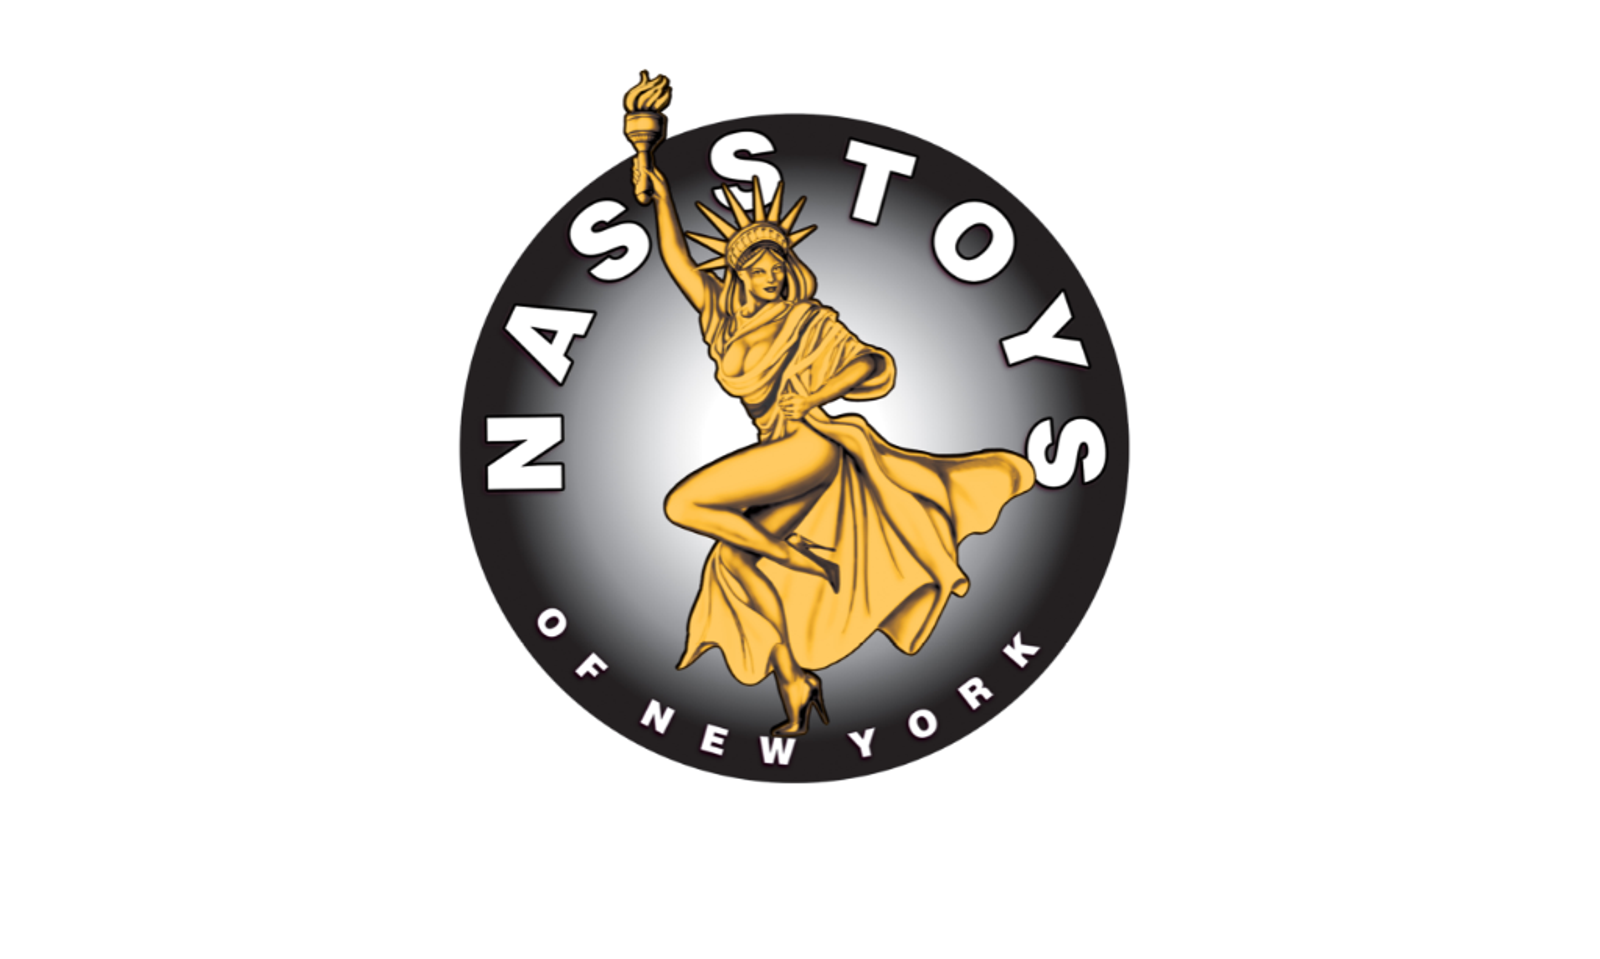 Nasstoys Offers Thanks to Its Customer Partners for Their Support